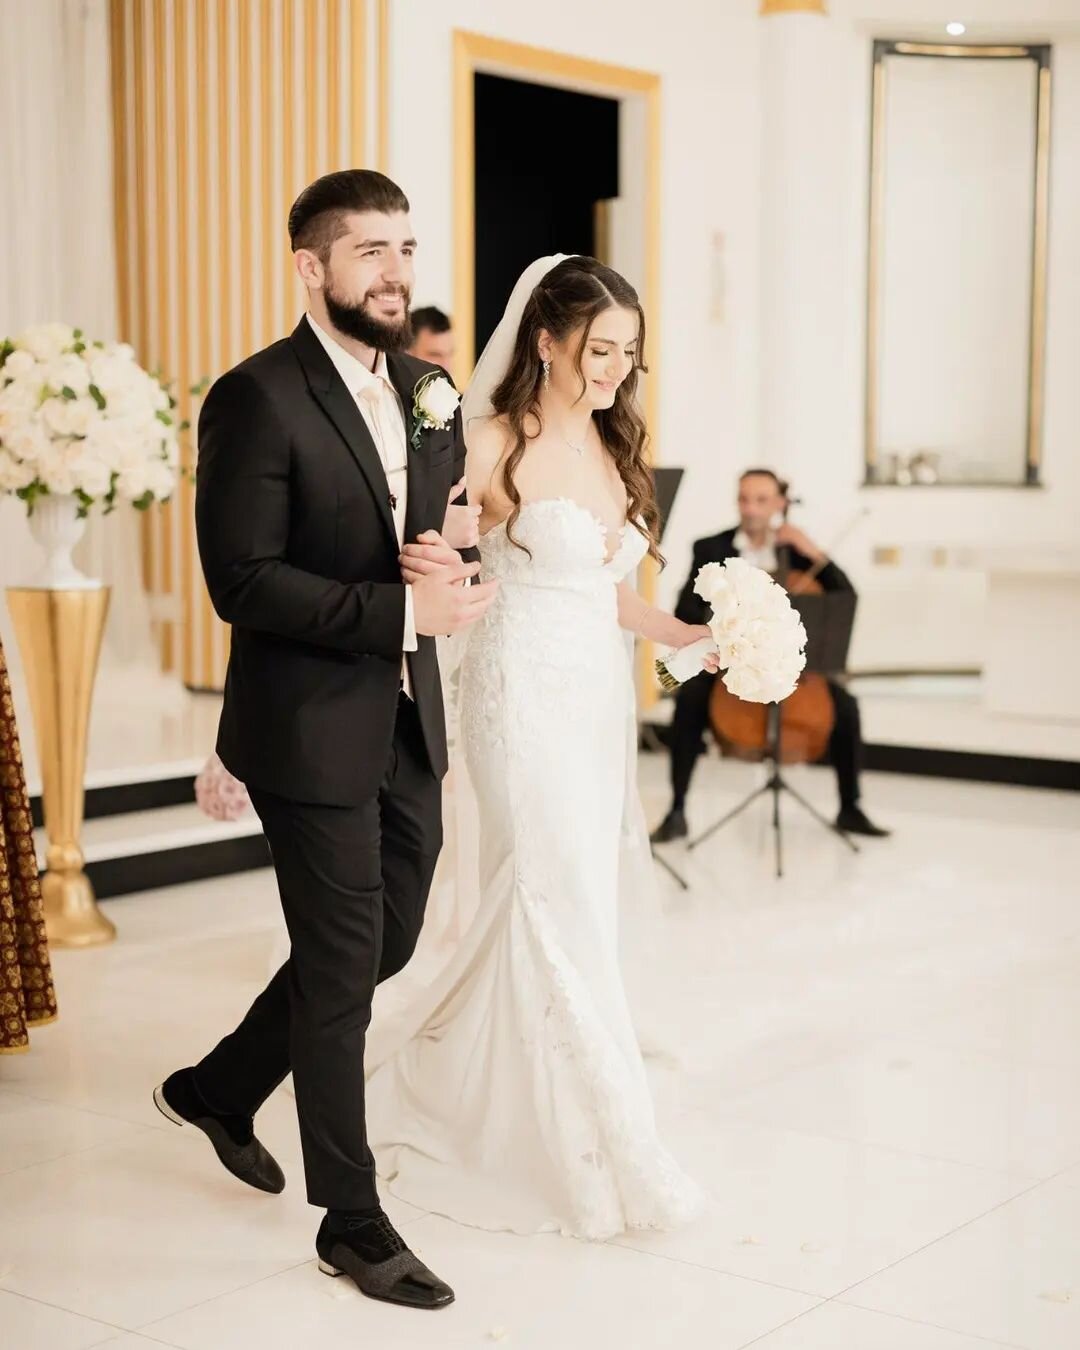 We love wedding season and when clients share their photos! 🤍 This gorgeous couple choose a combo of classical and contemporary songs for their traditional ceremony, featuring our Violin &amp; Cello Duo.

🔸️Wedding Party Processional: Young and Bea